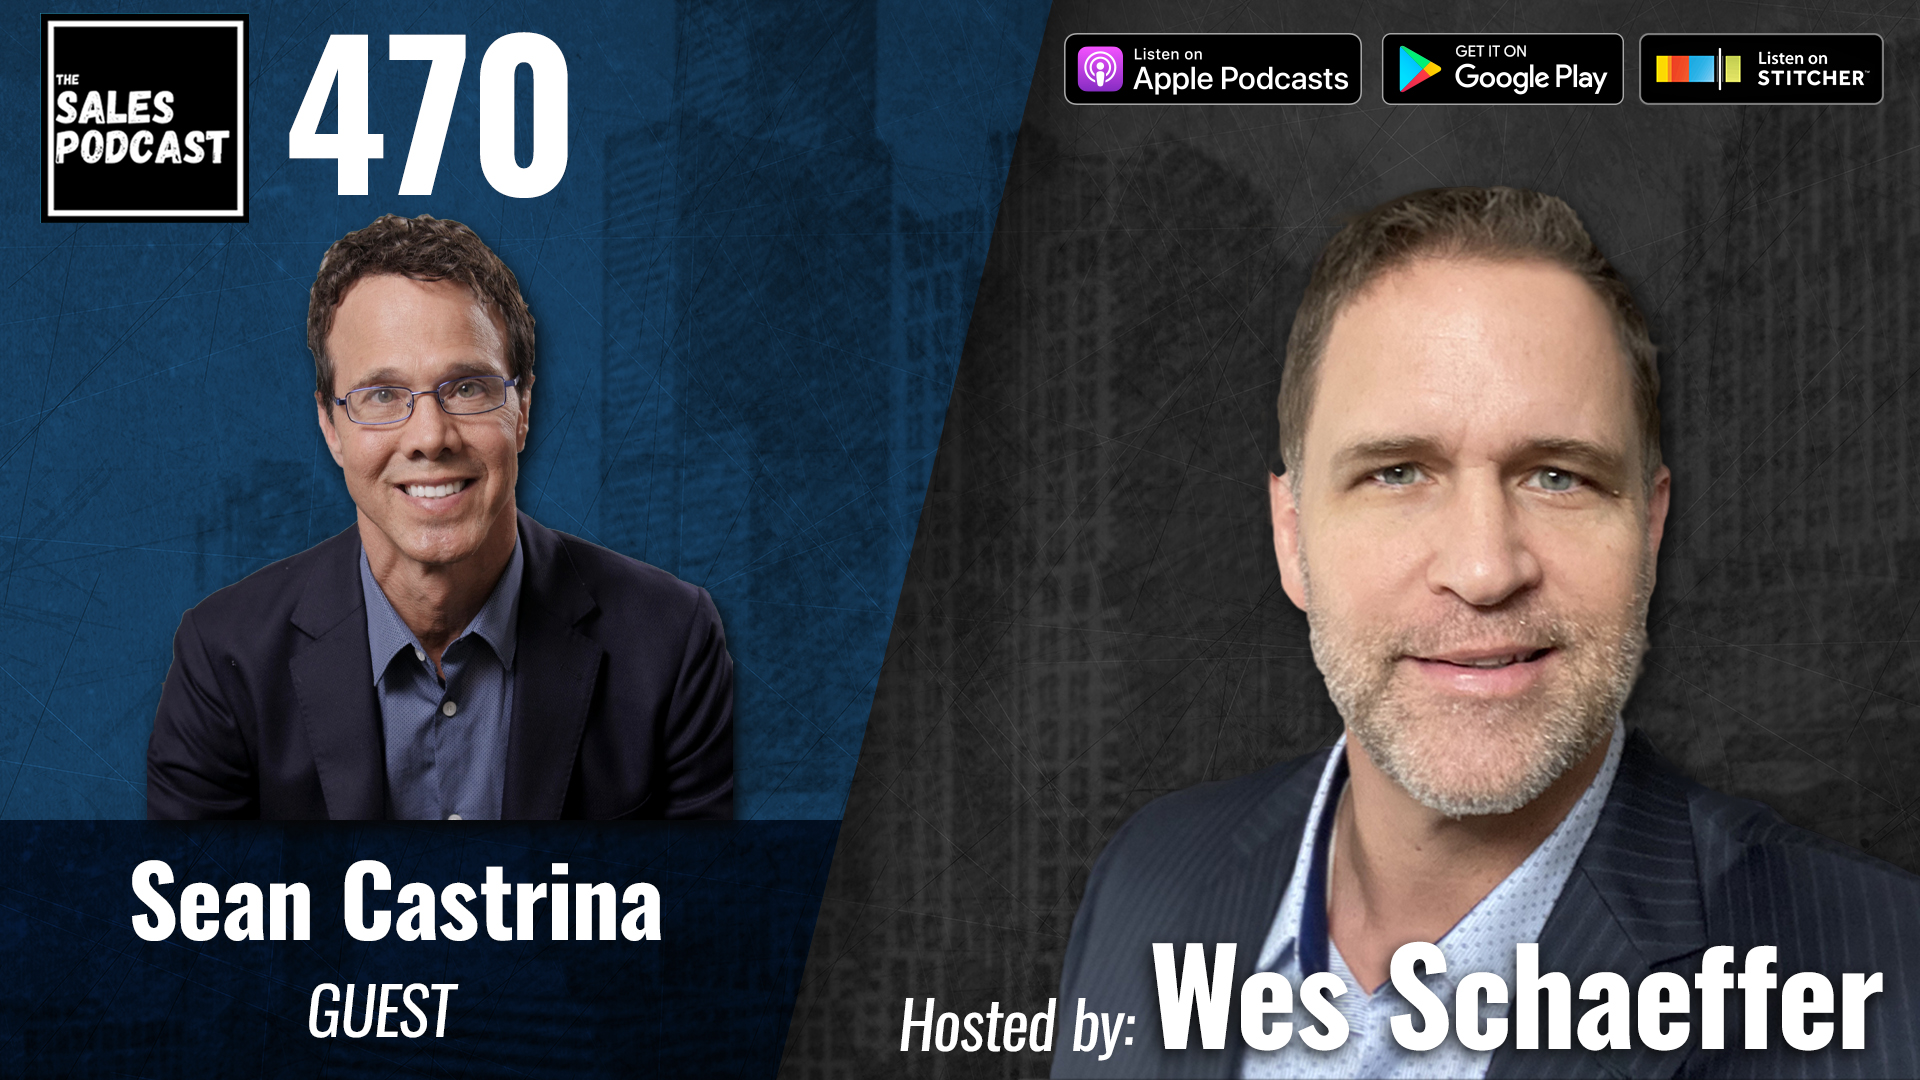 Business Leadership Is Bold and Win With Sean Castrina on The Sales Podcast with Wes Schaeffer, The Sales Whisperer®